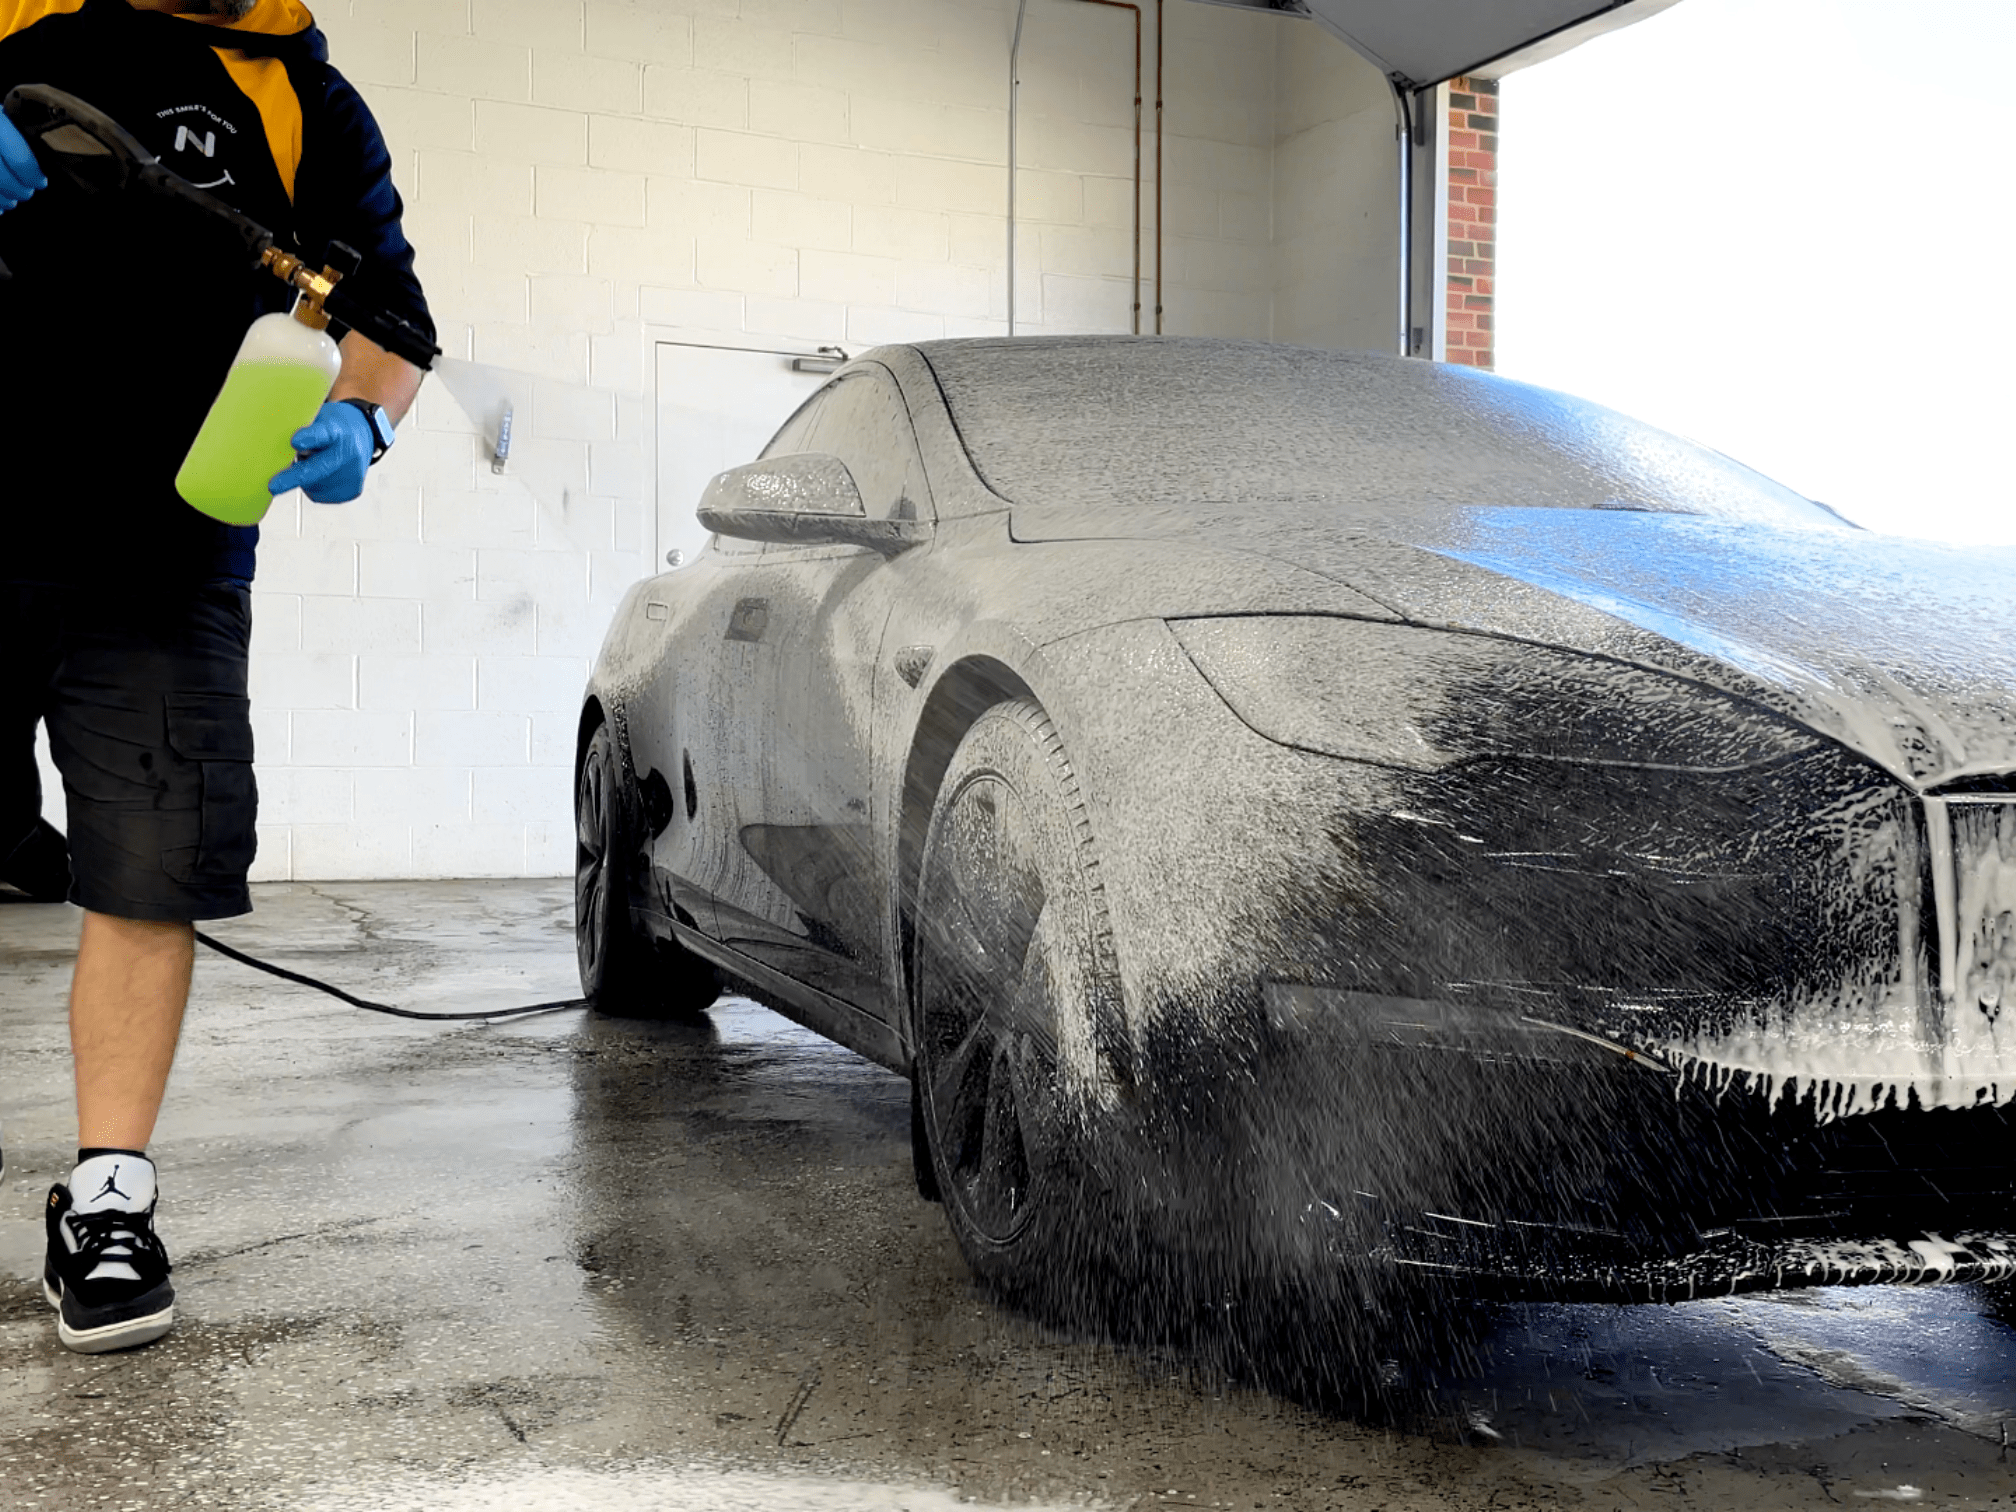 Paint Protection Film (PPF) Pricing & Costs - EZ Auto Spa